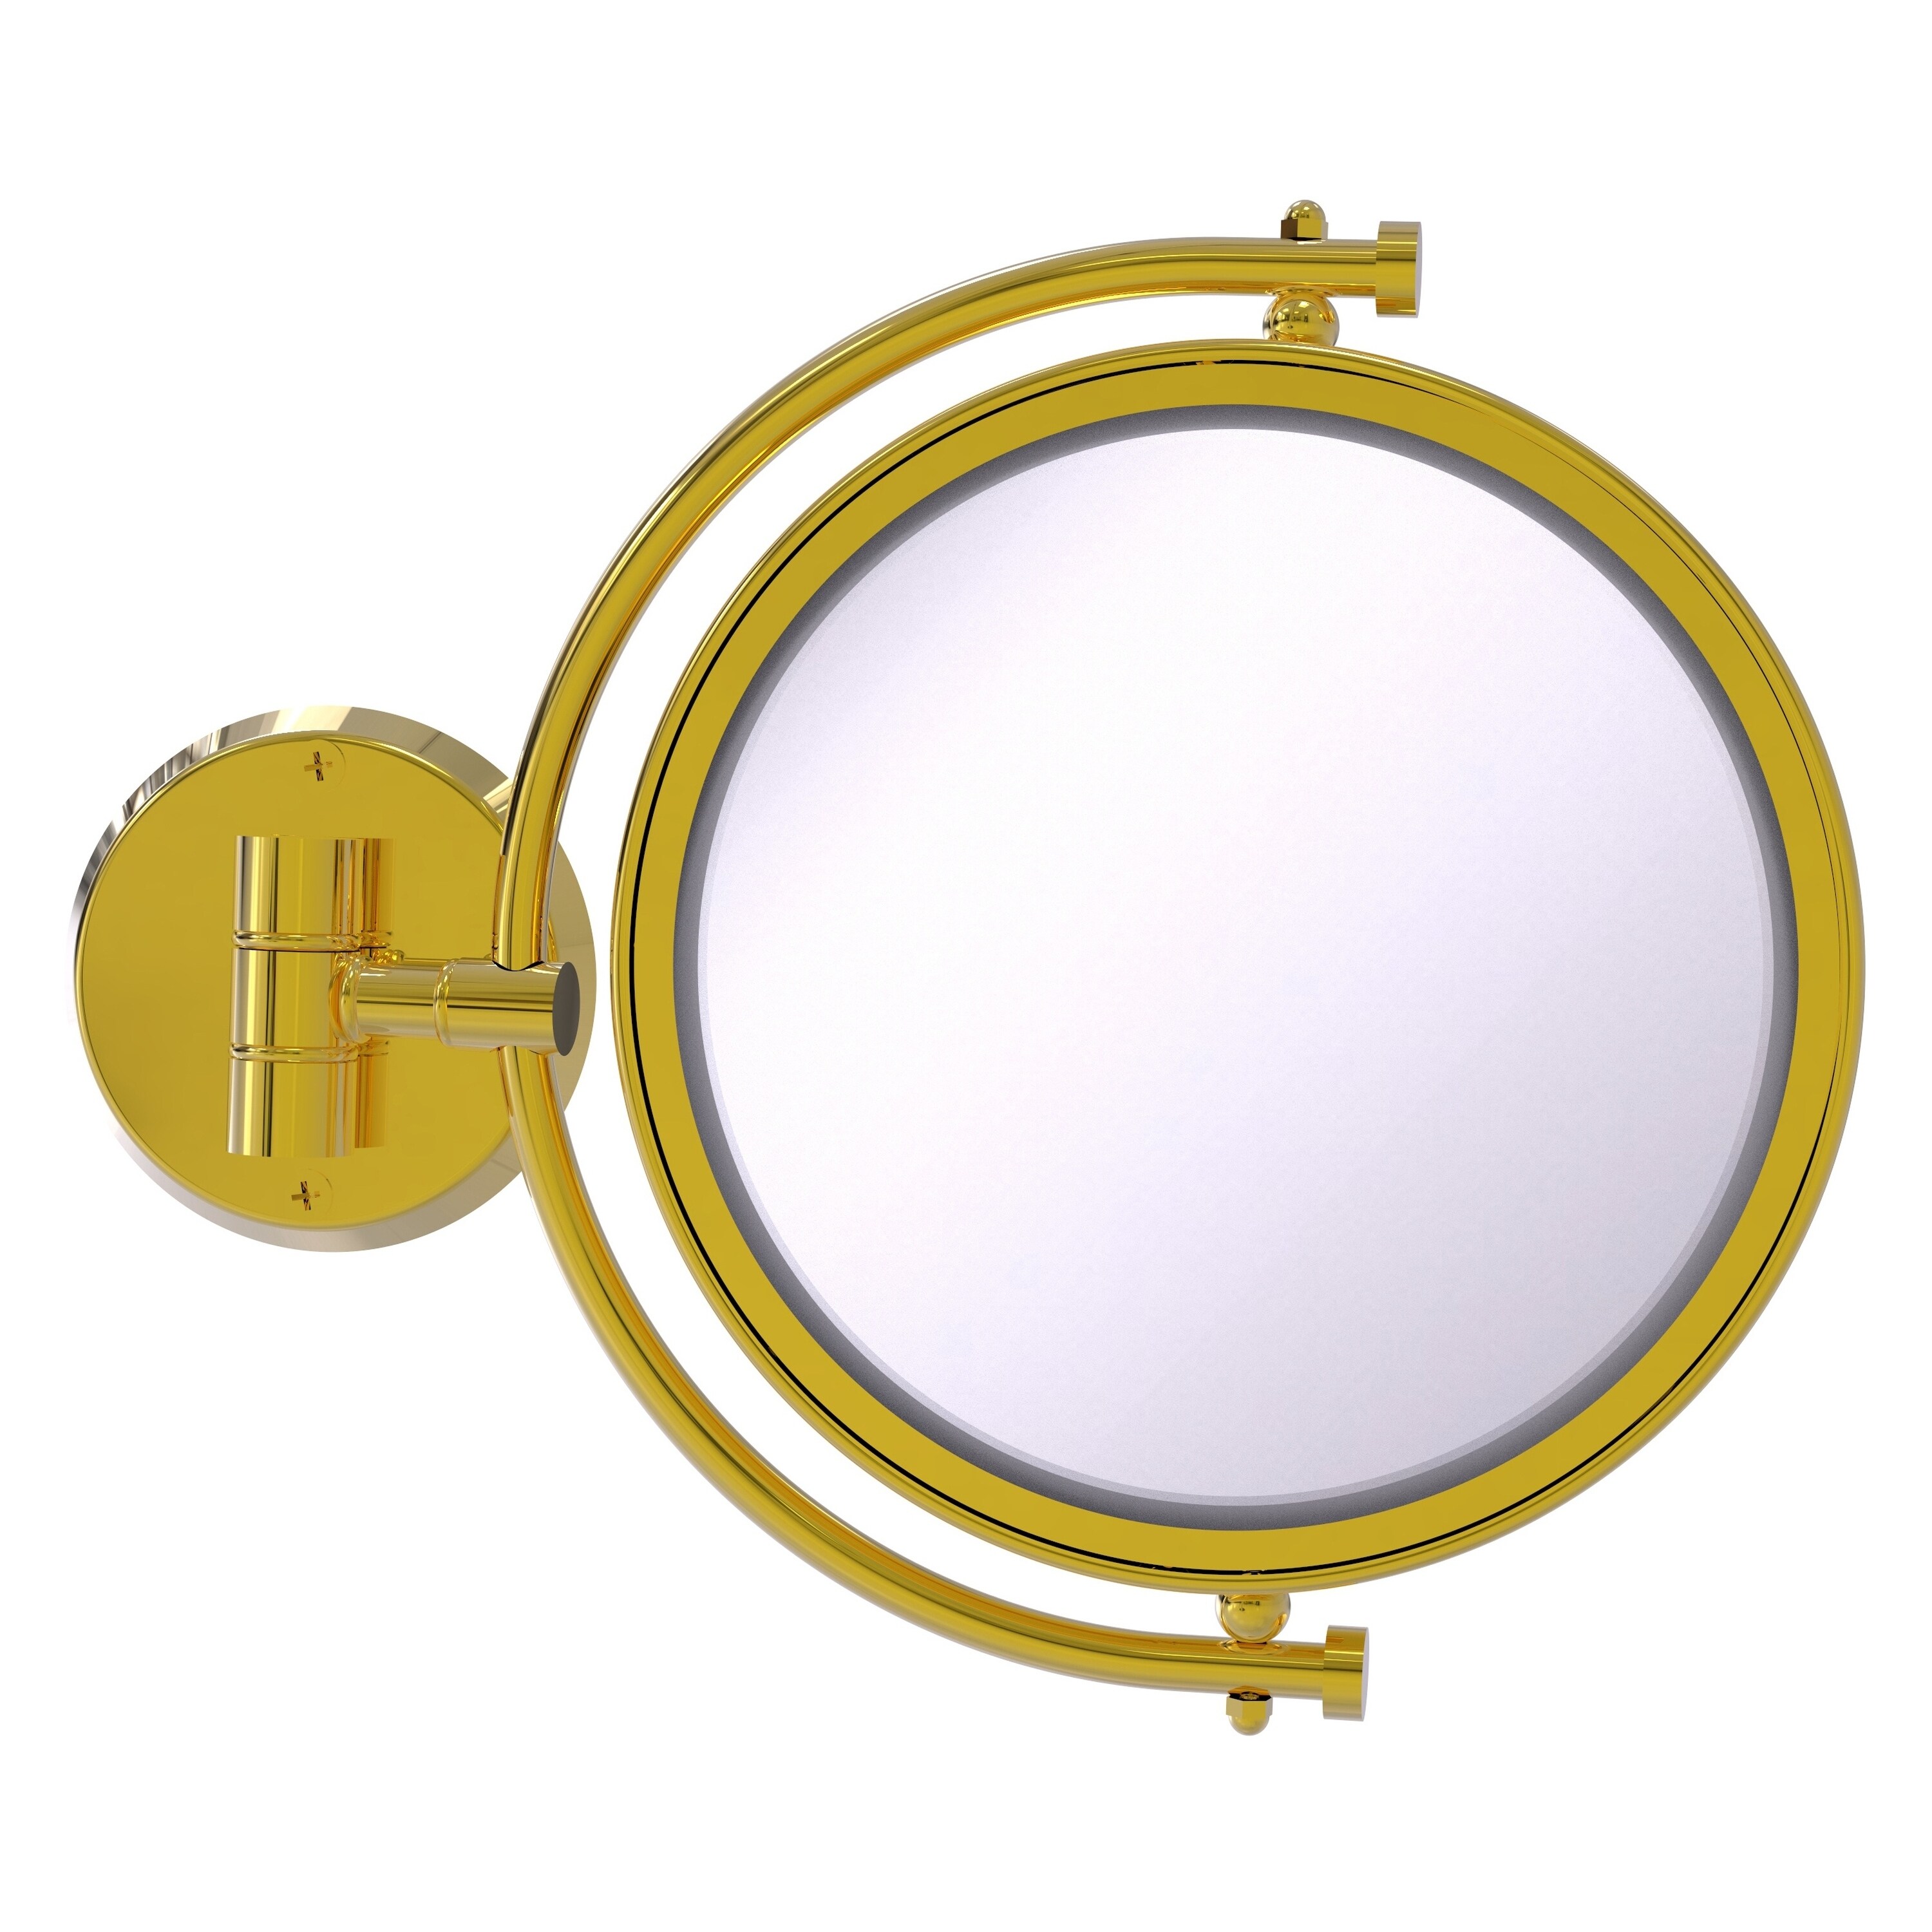 8-in x 10-in Polished Gold Double-sided 2X Magnifying Wall-mounted Vanity Mirror | - Allied Brass WM-4/2X-PB